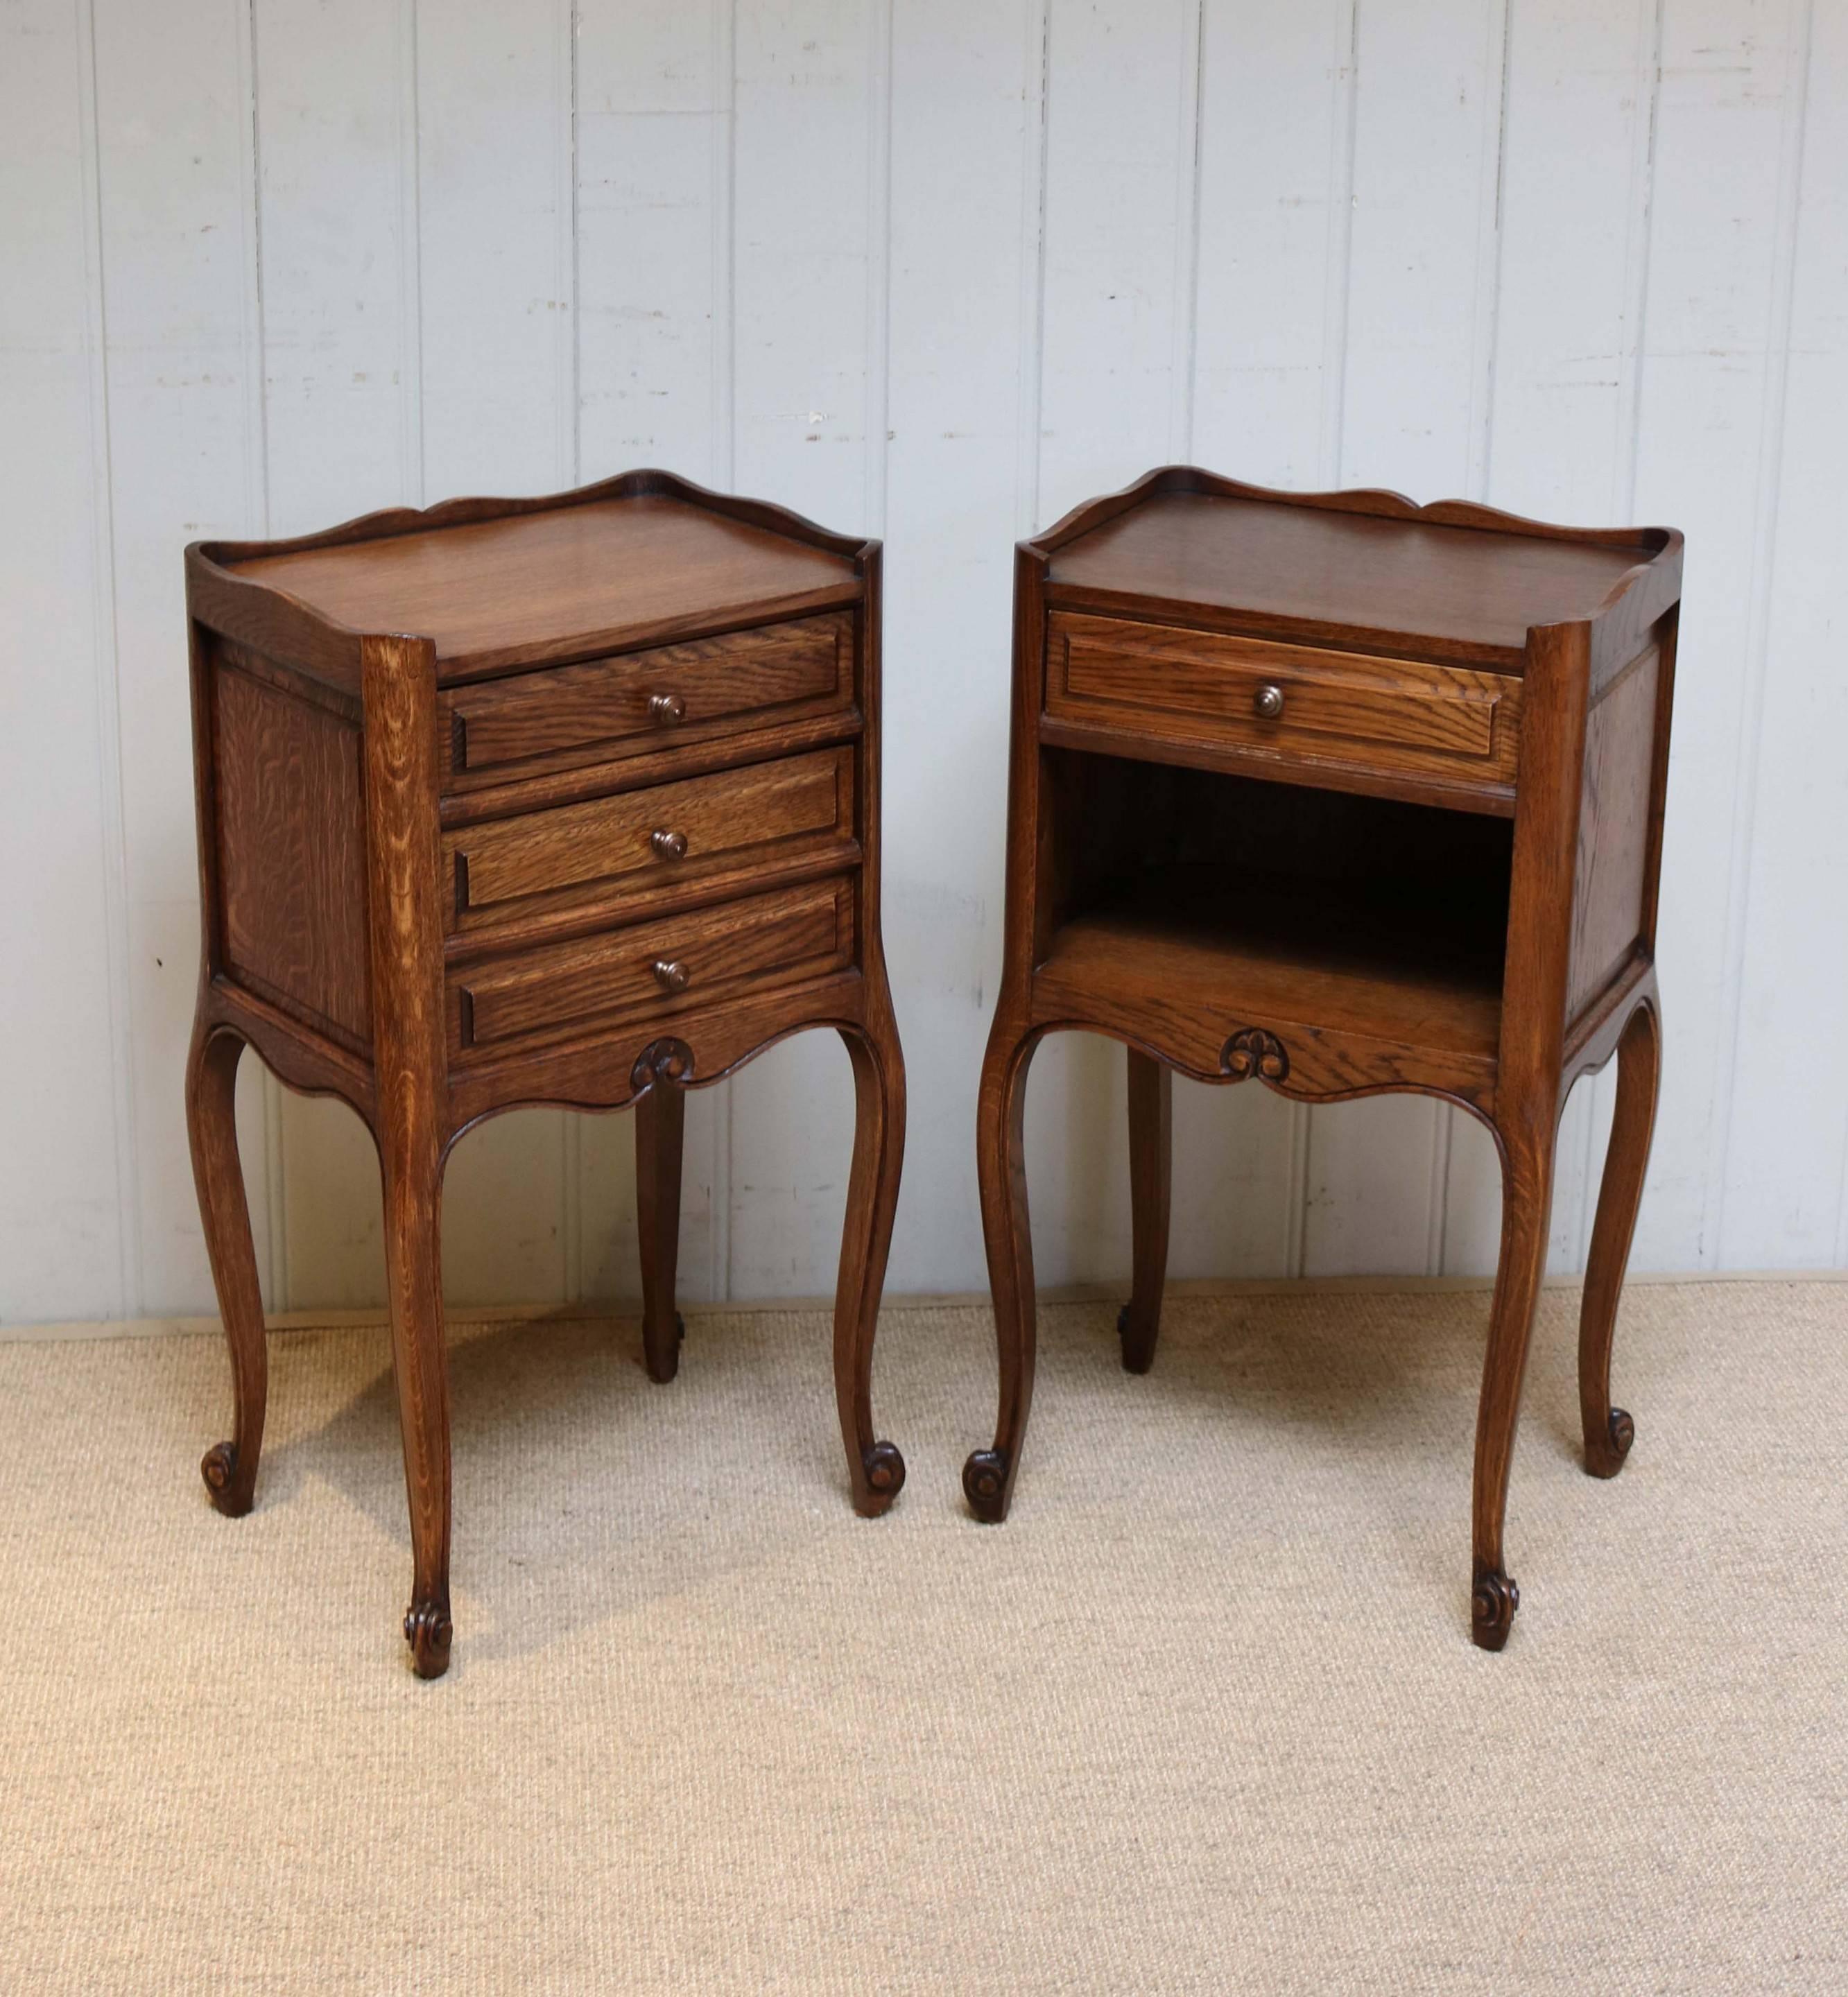 Pair of French oak bedside cabinets. One having three drawers, whilst the other has a single and open cupboard base. Both raised on cabriole legs.